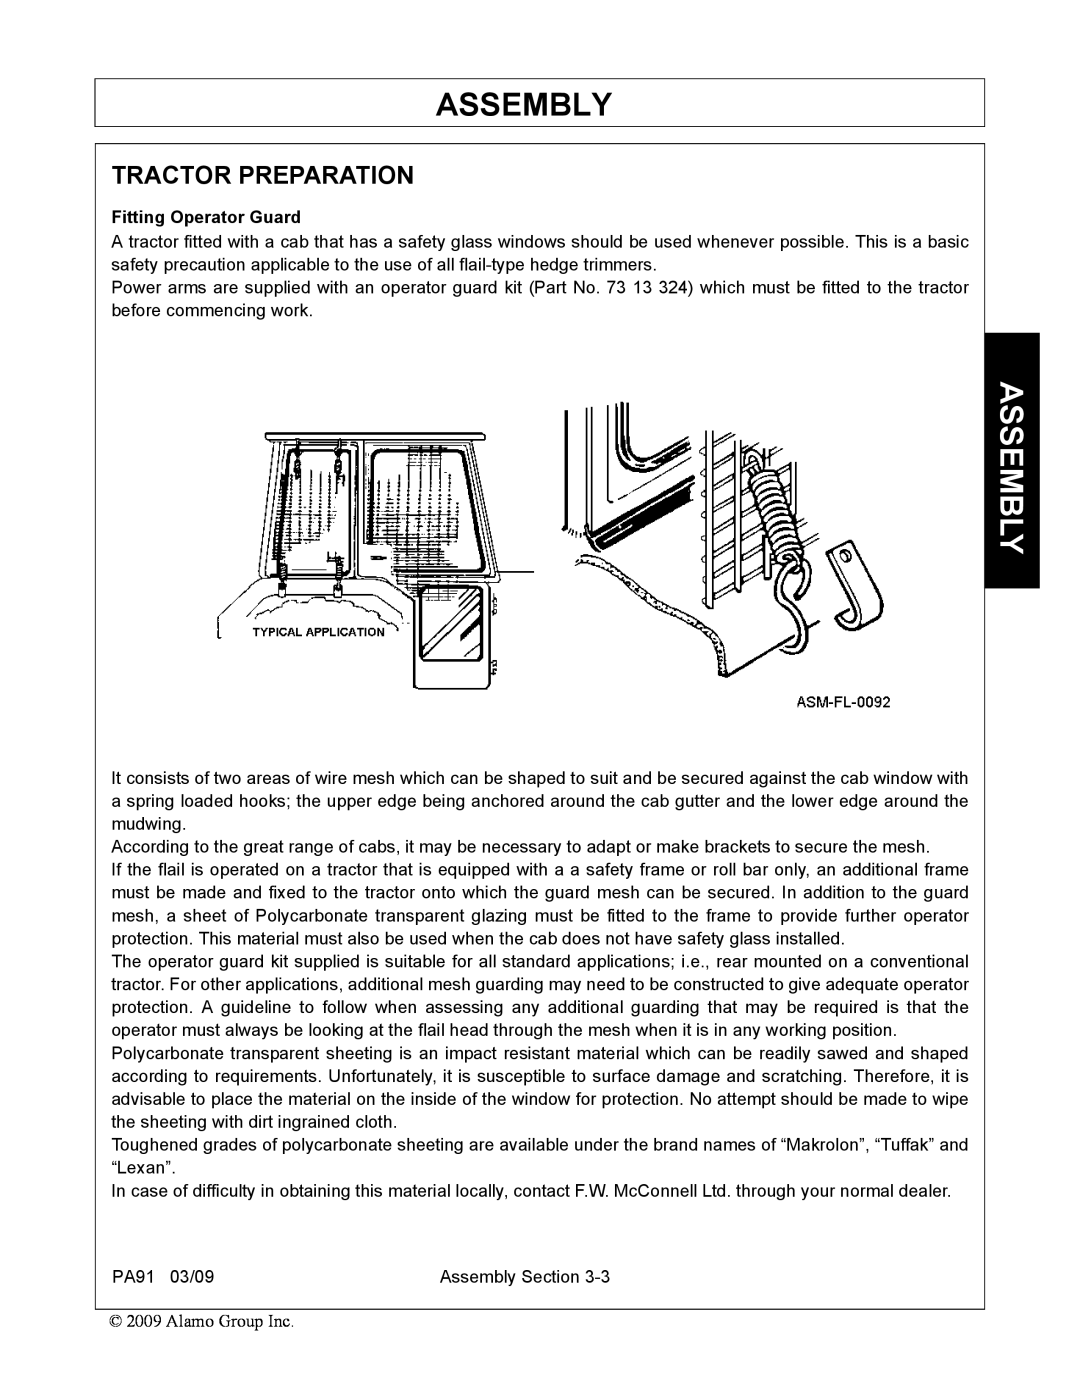 Alamo 7191852C manual Tractor Preparation, Assembly, Fitting Operator Guard 